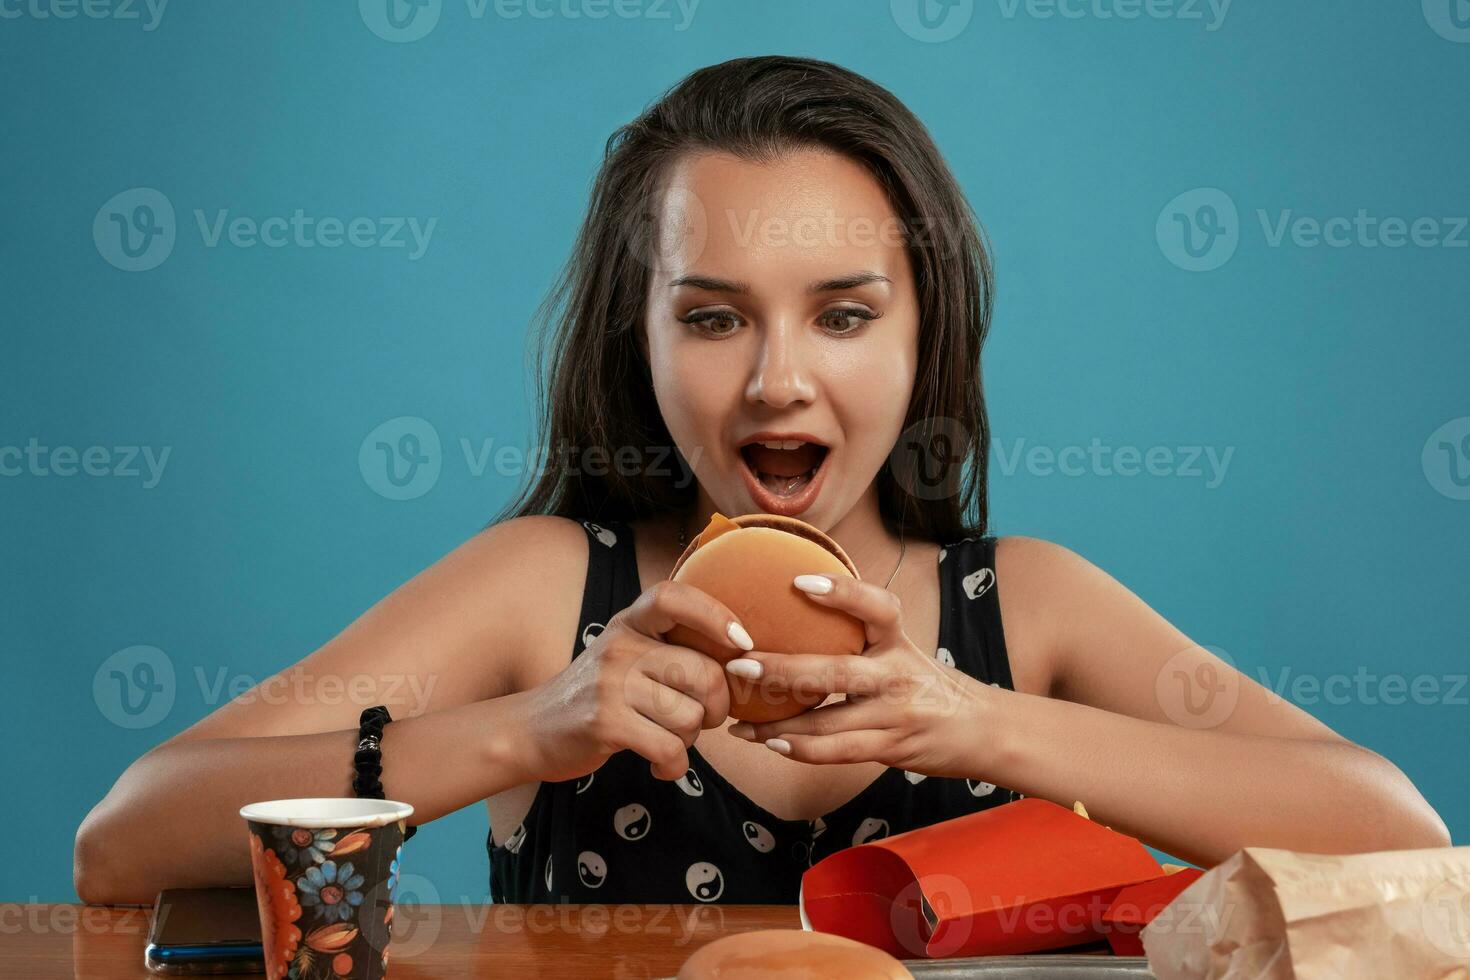 Close-up portrait of a woman in a black dress posing sitting at the table with burgers, french fries and drink. Blue background. Fast food. photo